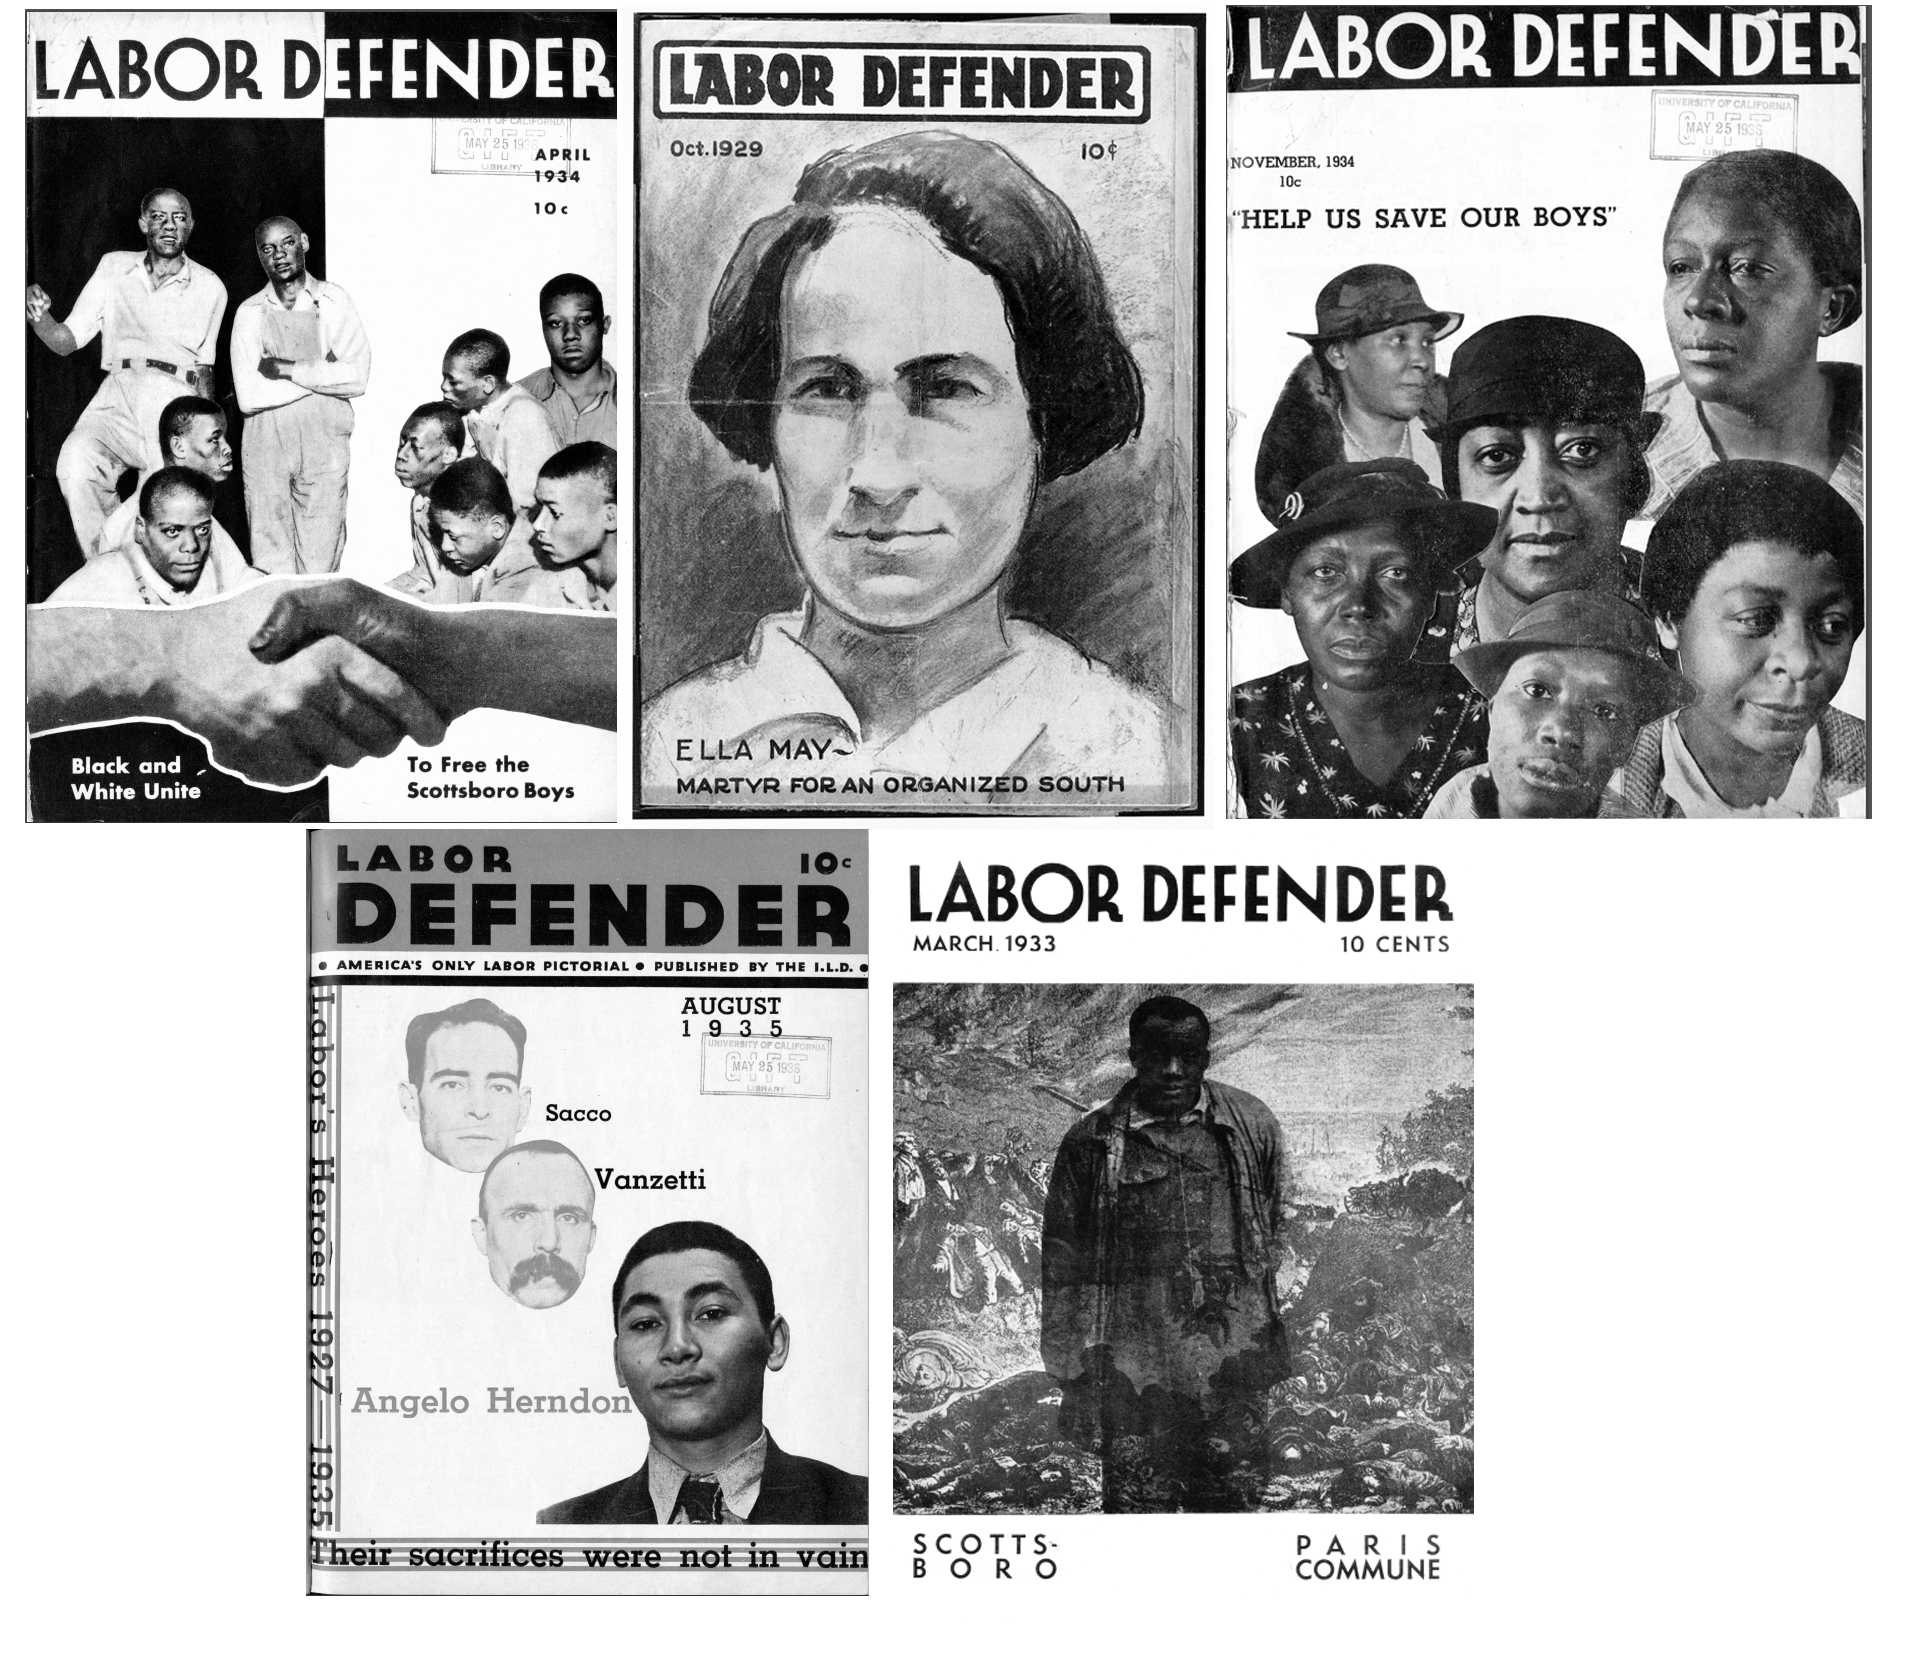 Various Depression-era covers of Labor Defender, publication of the ILD. (Illustrations: Marxists Internet Archive)